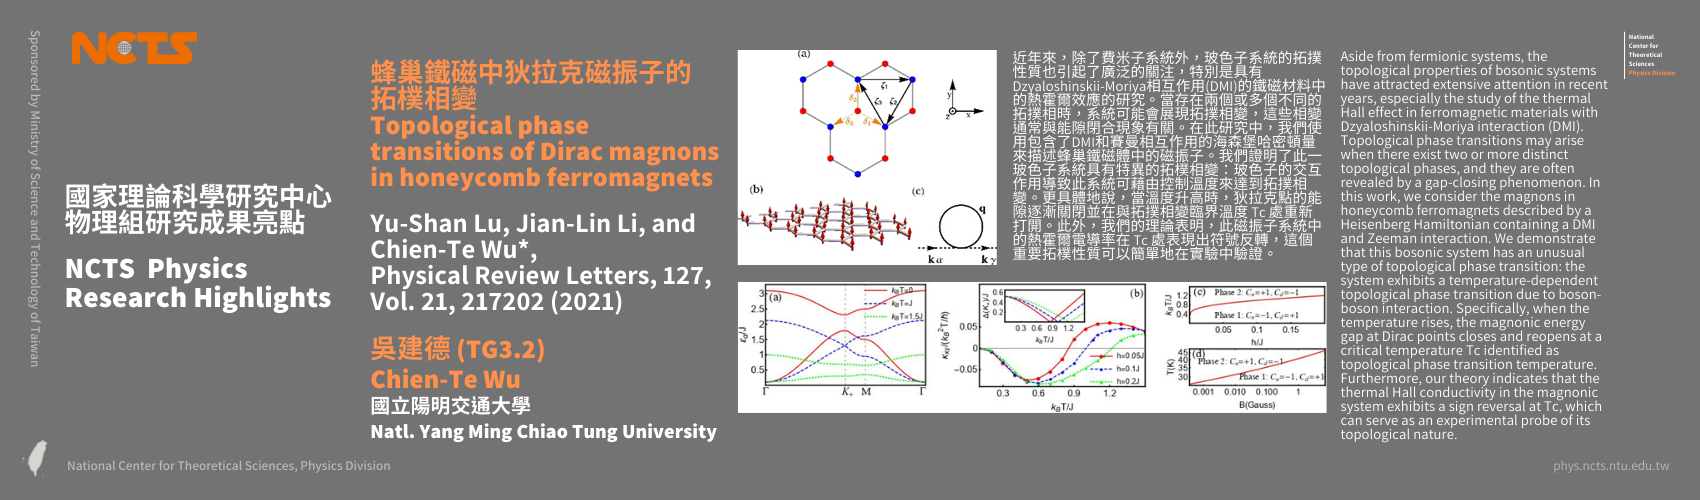 NCTS Physics Research Highlights - Chien-Te Wu "Topological phase transitions of Dirac magnons in honeycomb ferromagnets", Physical Review Letters (2021)